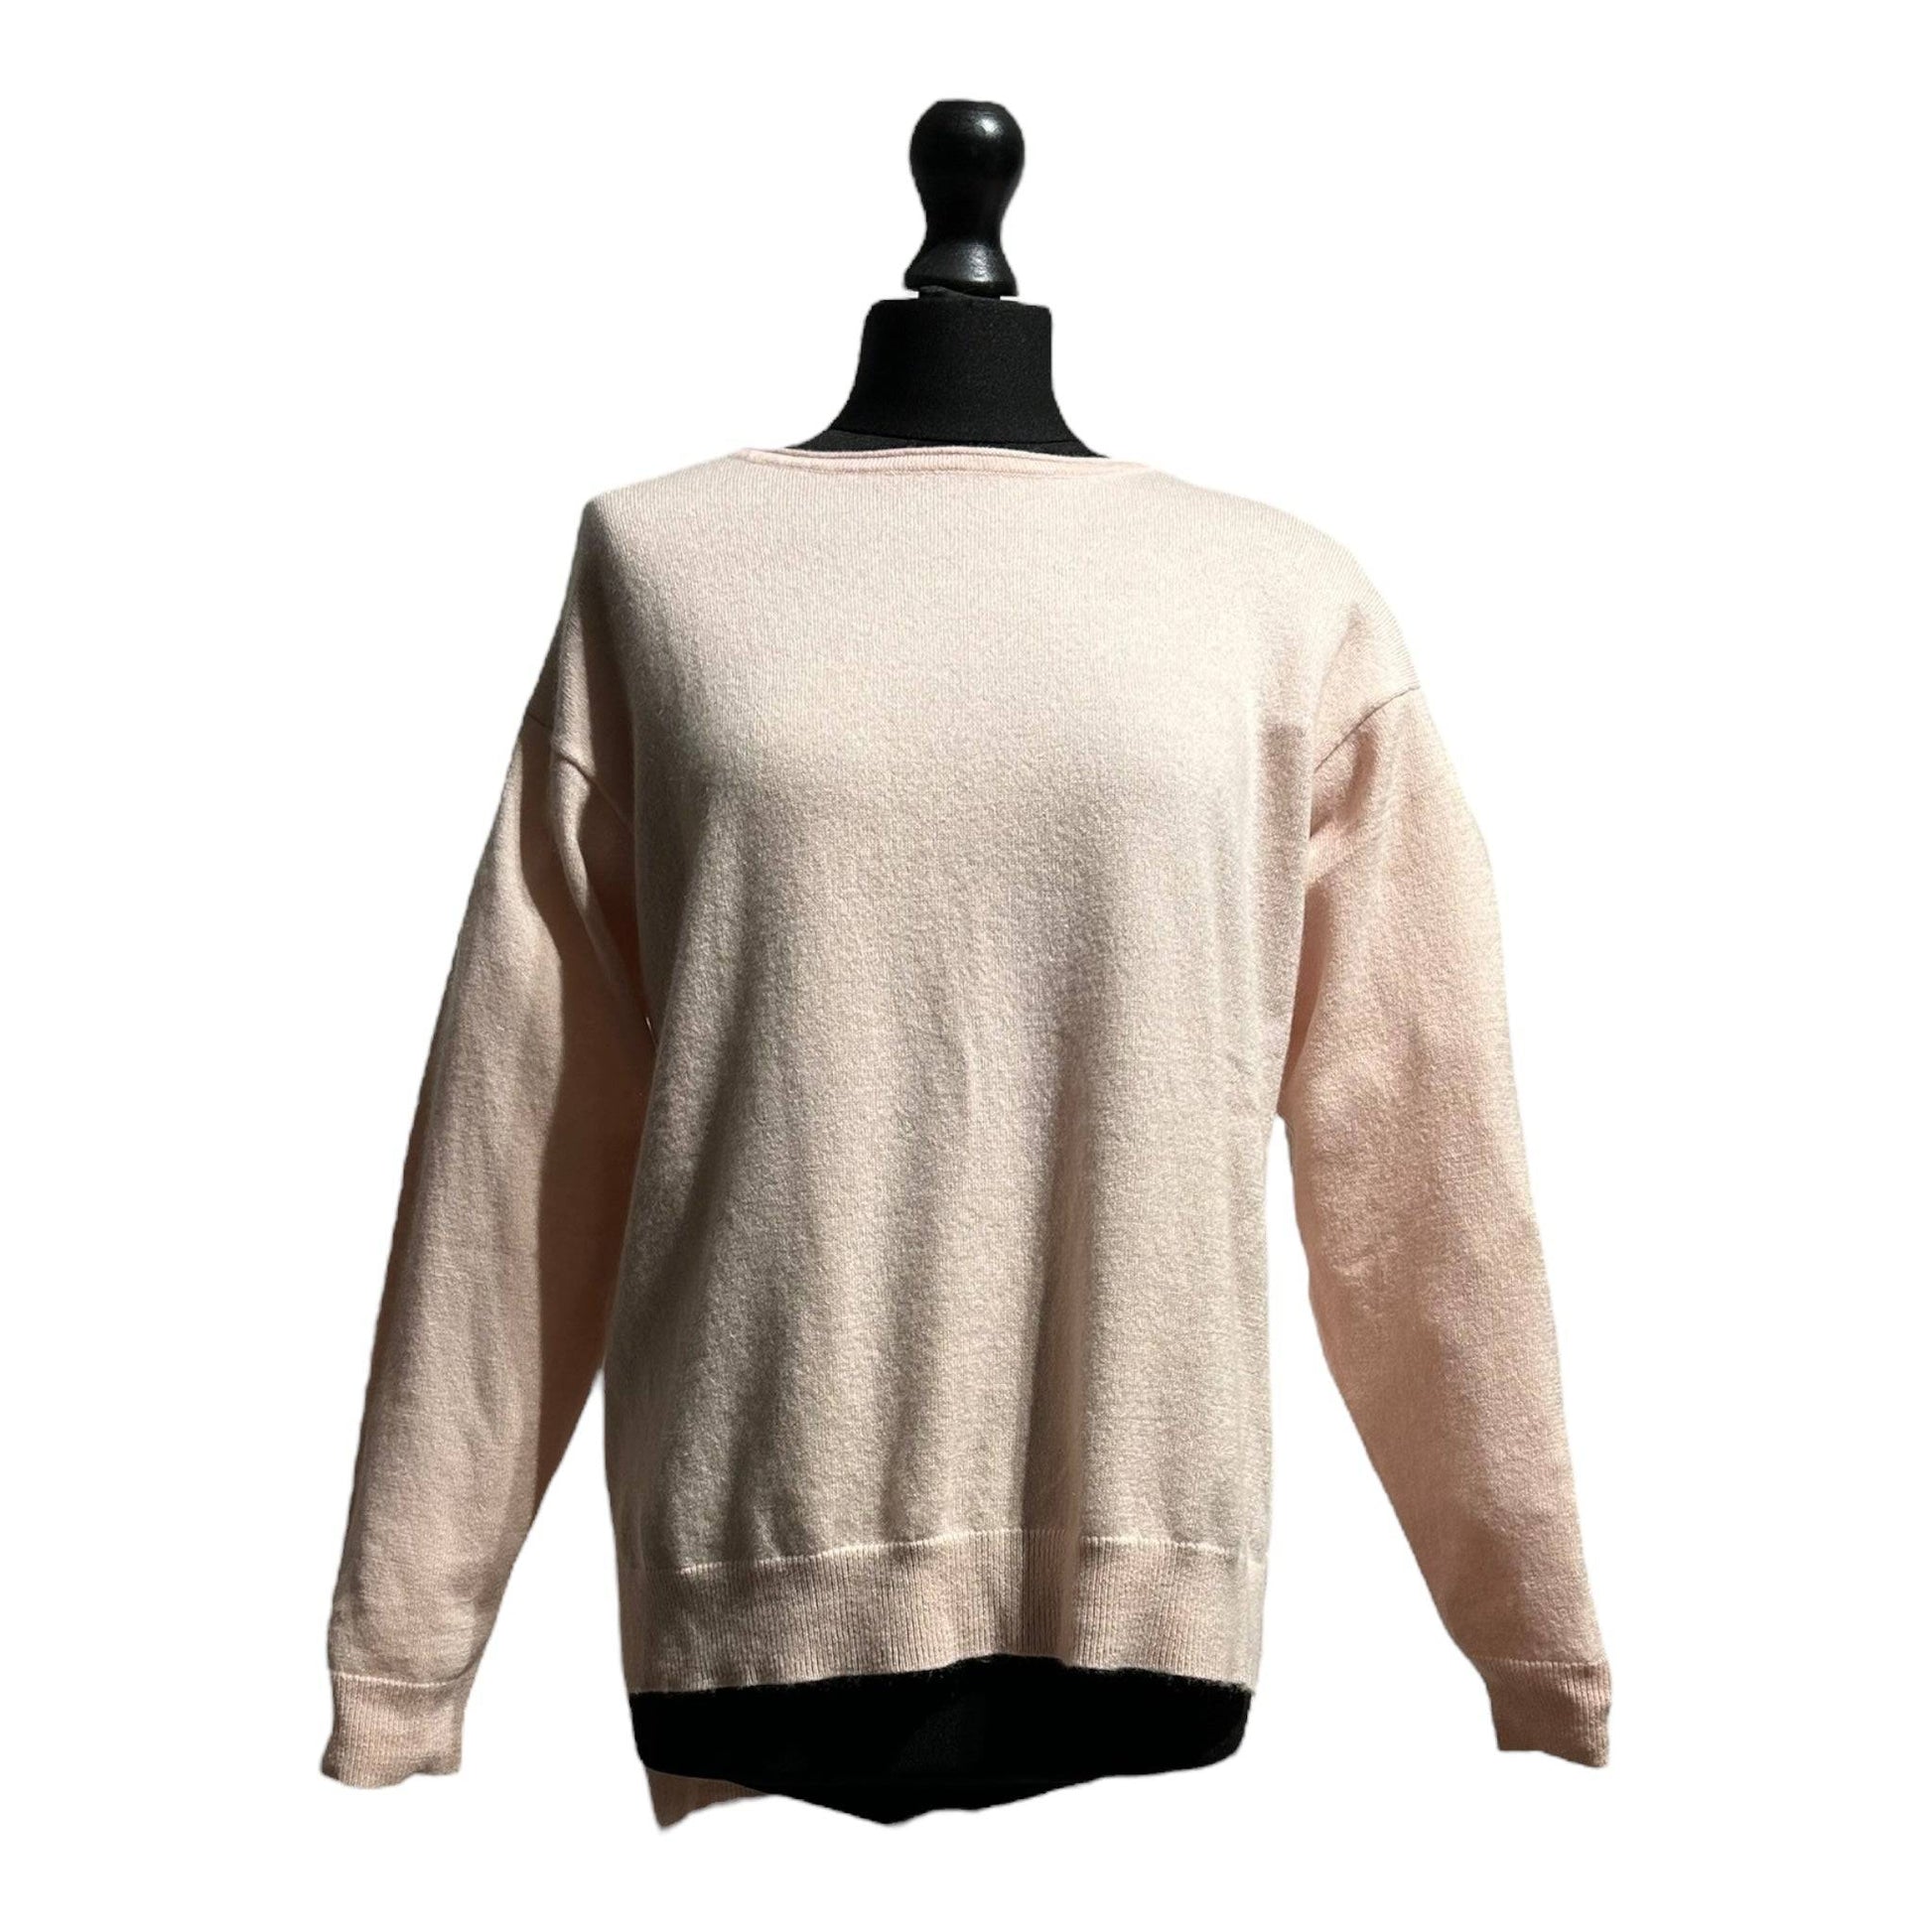 Cocoa Cashmere London Cologne Jumper - Recurring.Life